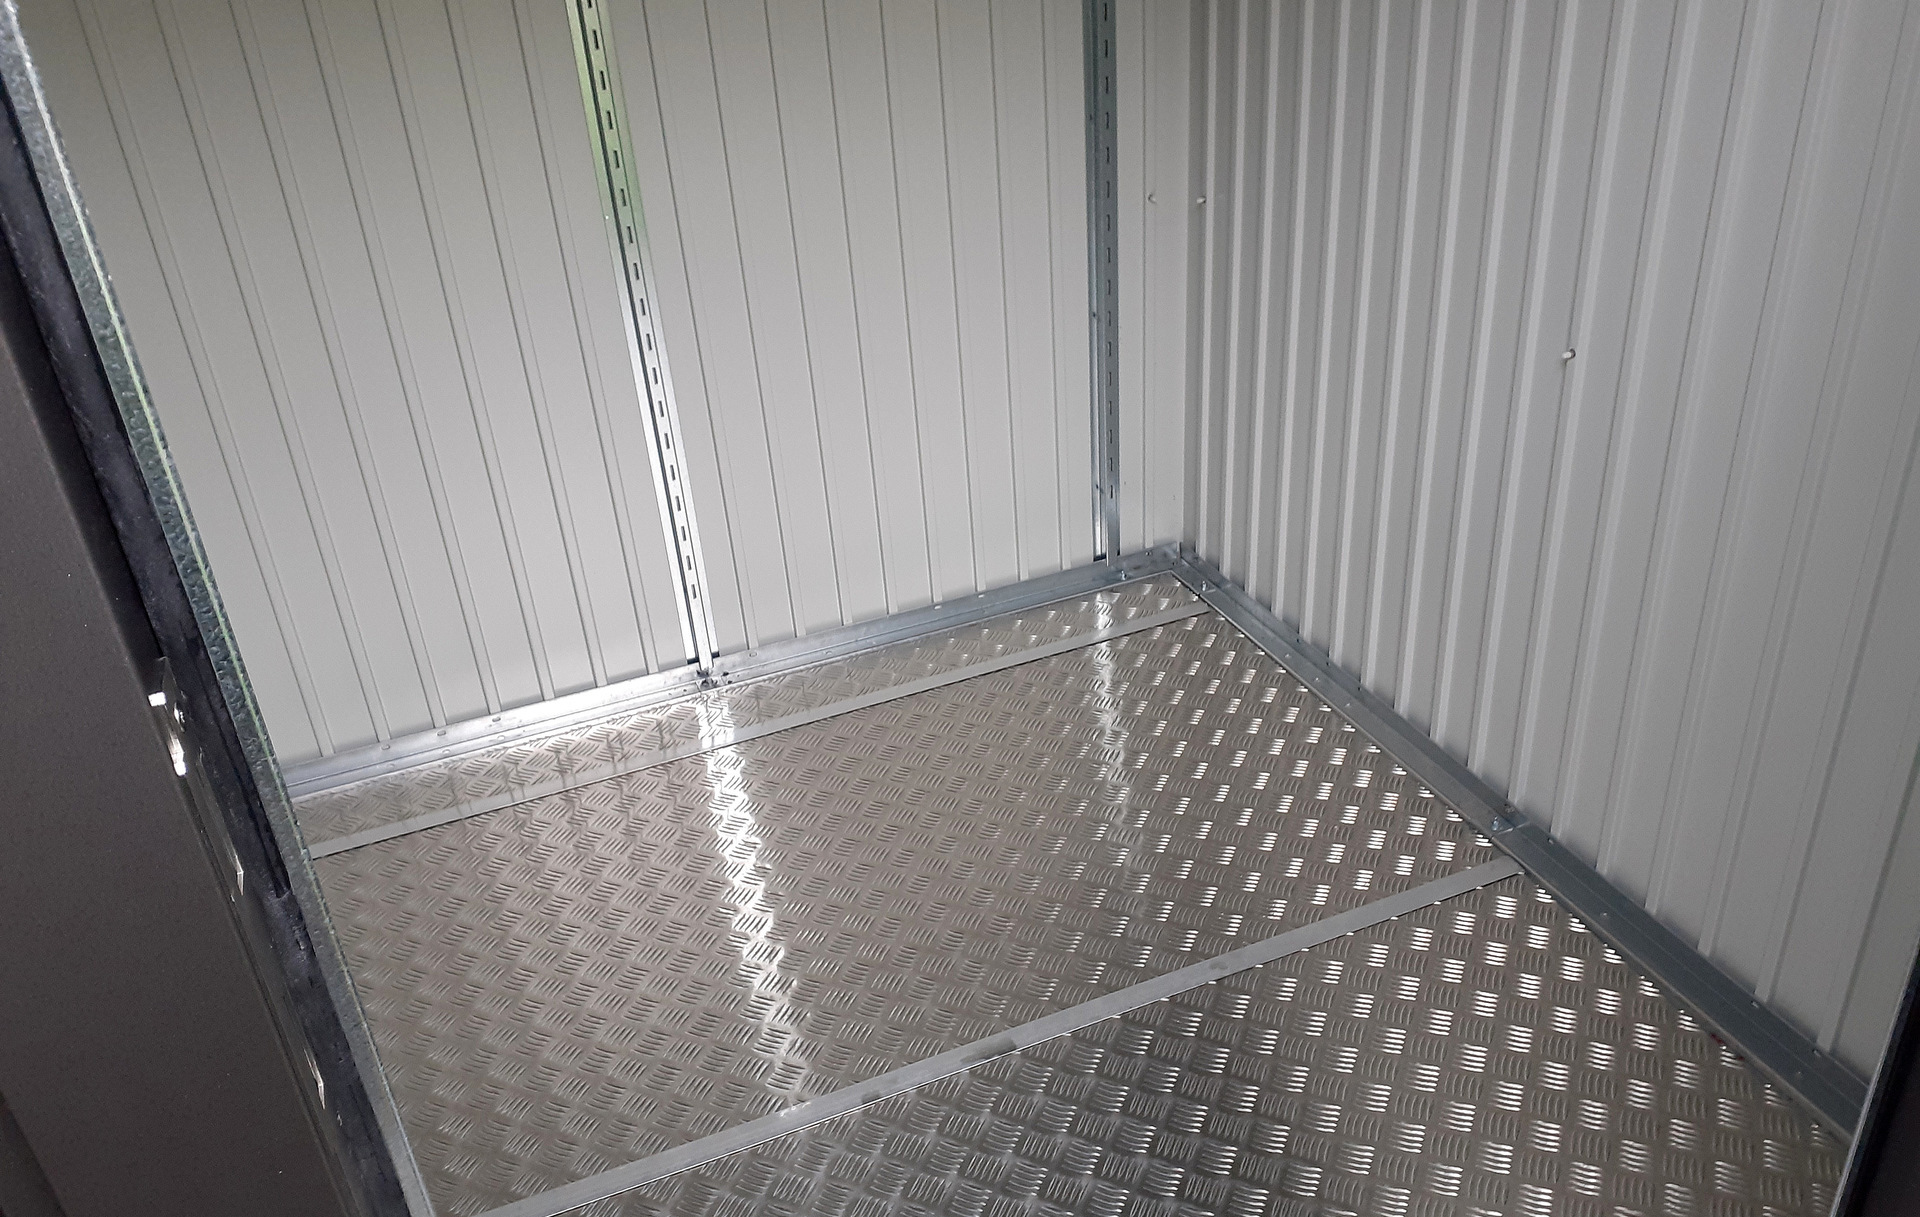 The optional aluminium floor frame & floor panels, essential optional accessories for the Biohort AvantGarde A1 Steel Garden Shed, which was supplied + fitted in Leopardstow, Dublin 18 by Owen Chubb Landscapers, Ireland's #1 Biohort Dealer for Value & Service.